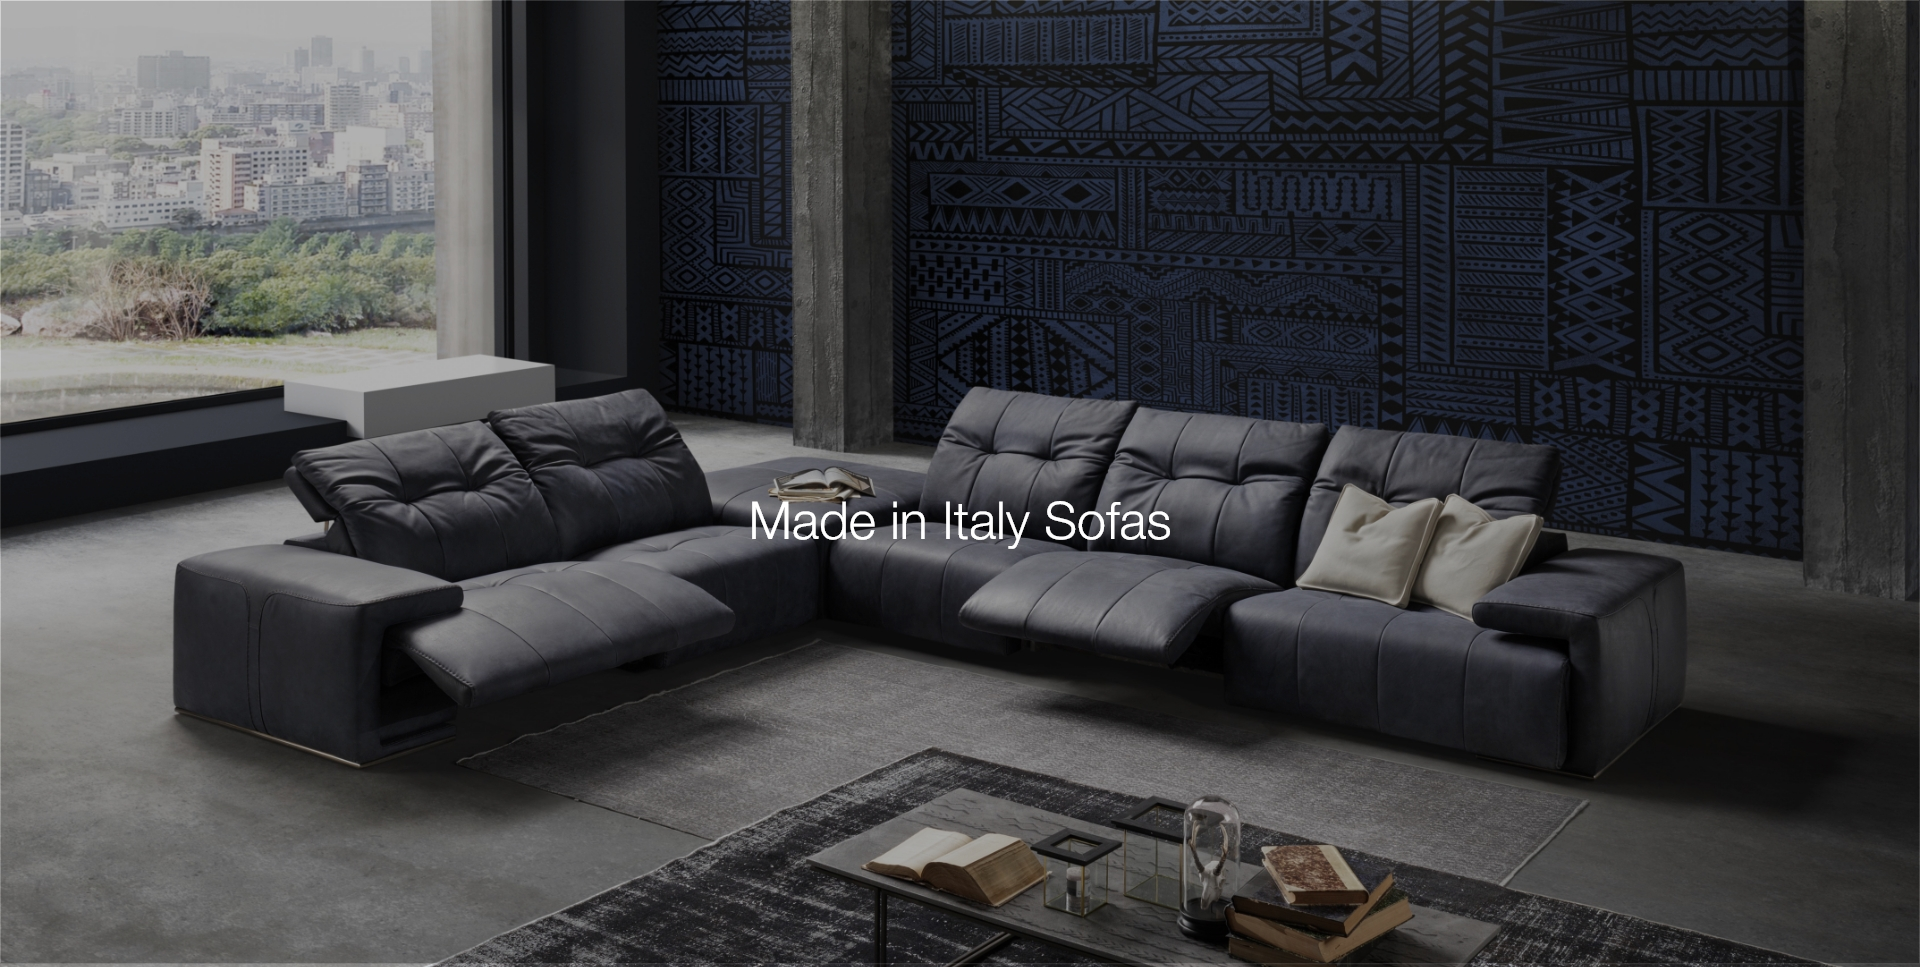 Made in Italy Sofas